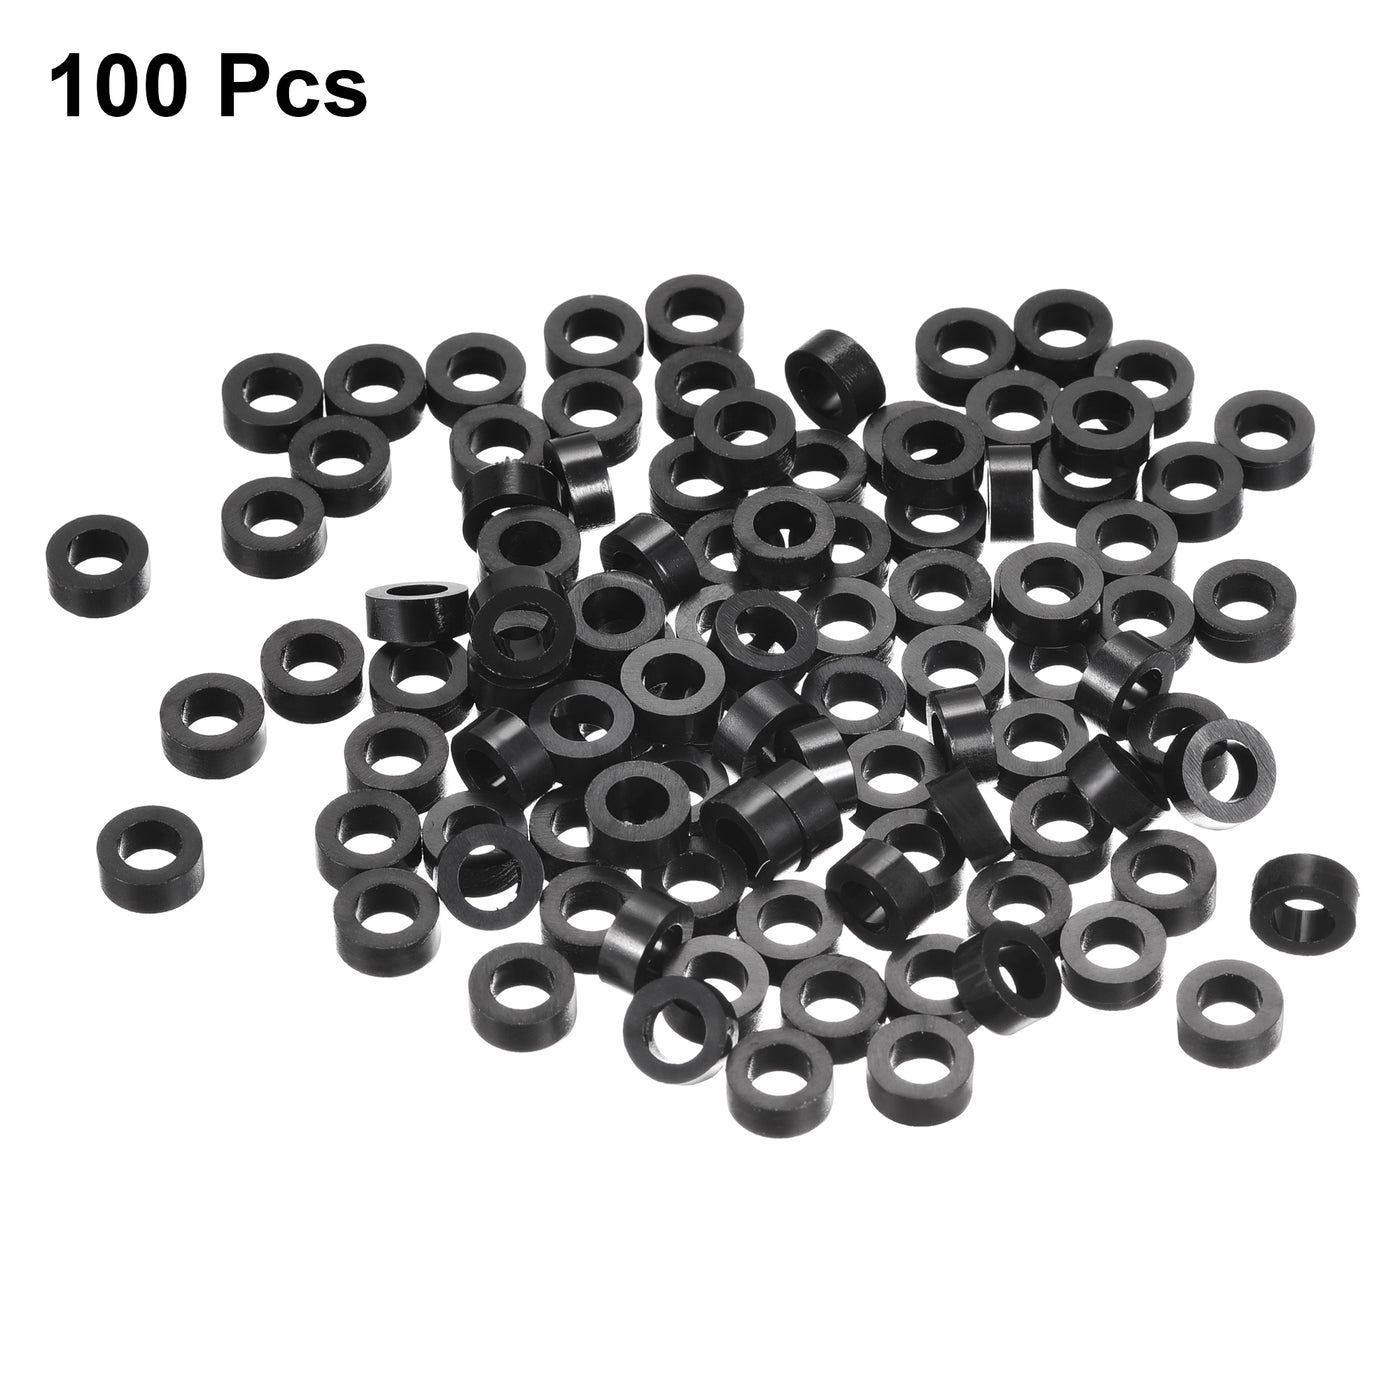 uxcell Uxcell Nylon Round Spacer Washer 4.2mmx7mmx3mm for M4 Screws Black 100Pcs